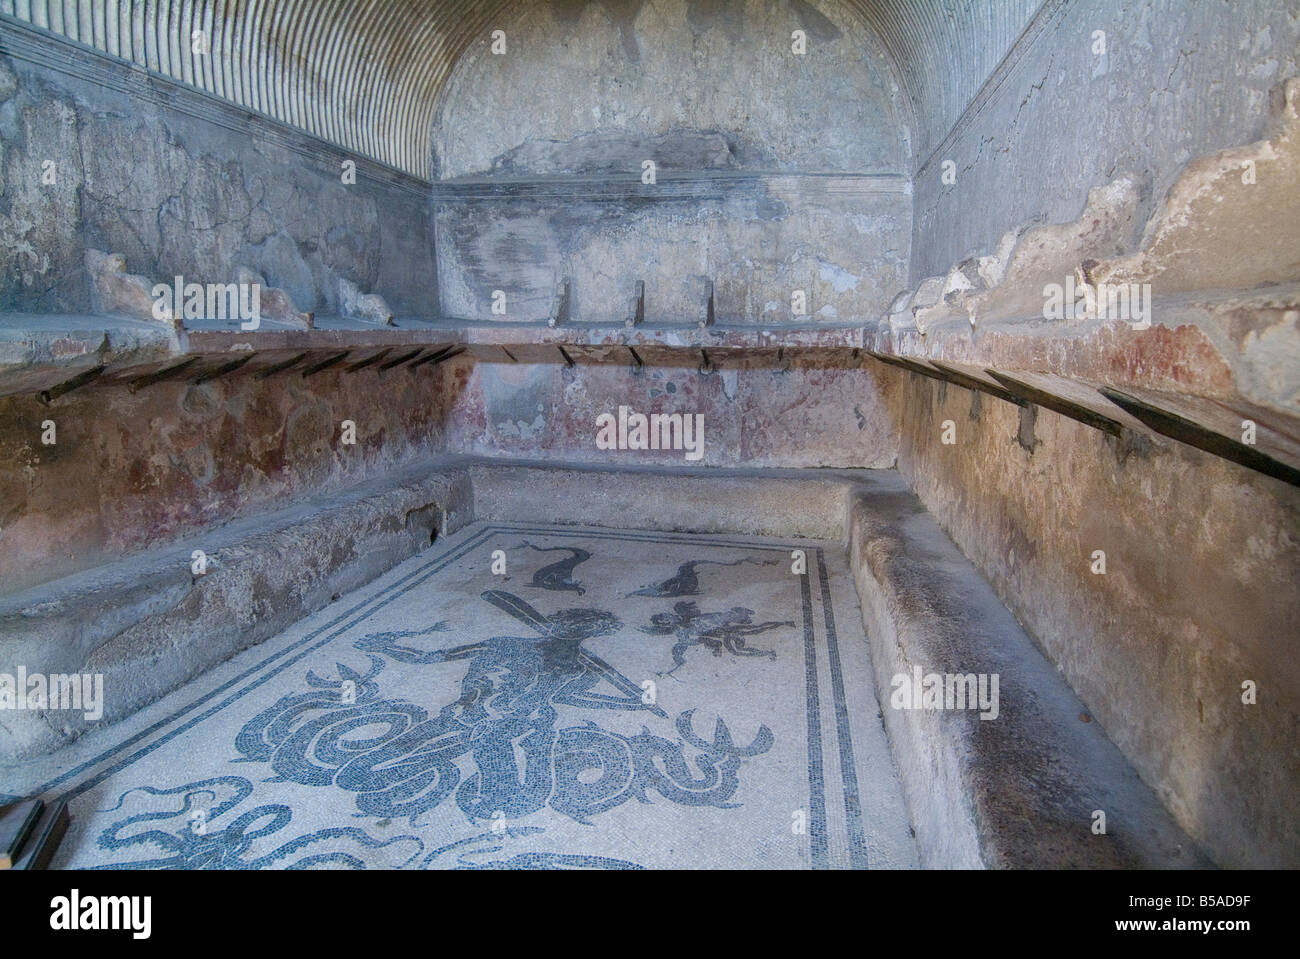 Bath house mosaic from Herculaneum, a large Roman town destroyed by a volcanic eruption from Mount Vesuvius, Campania, Italy Stock Photo